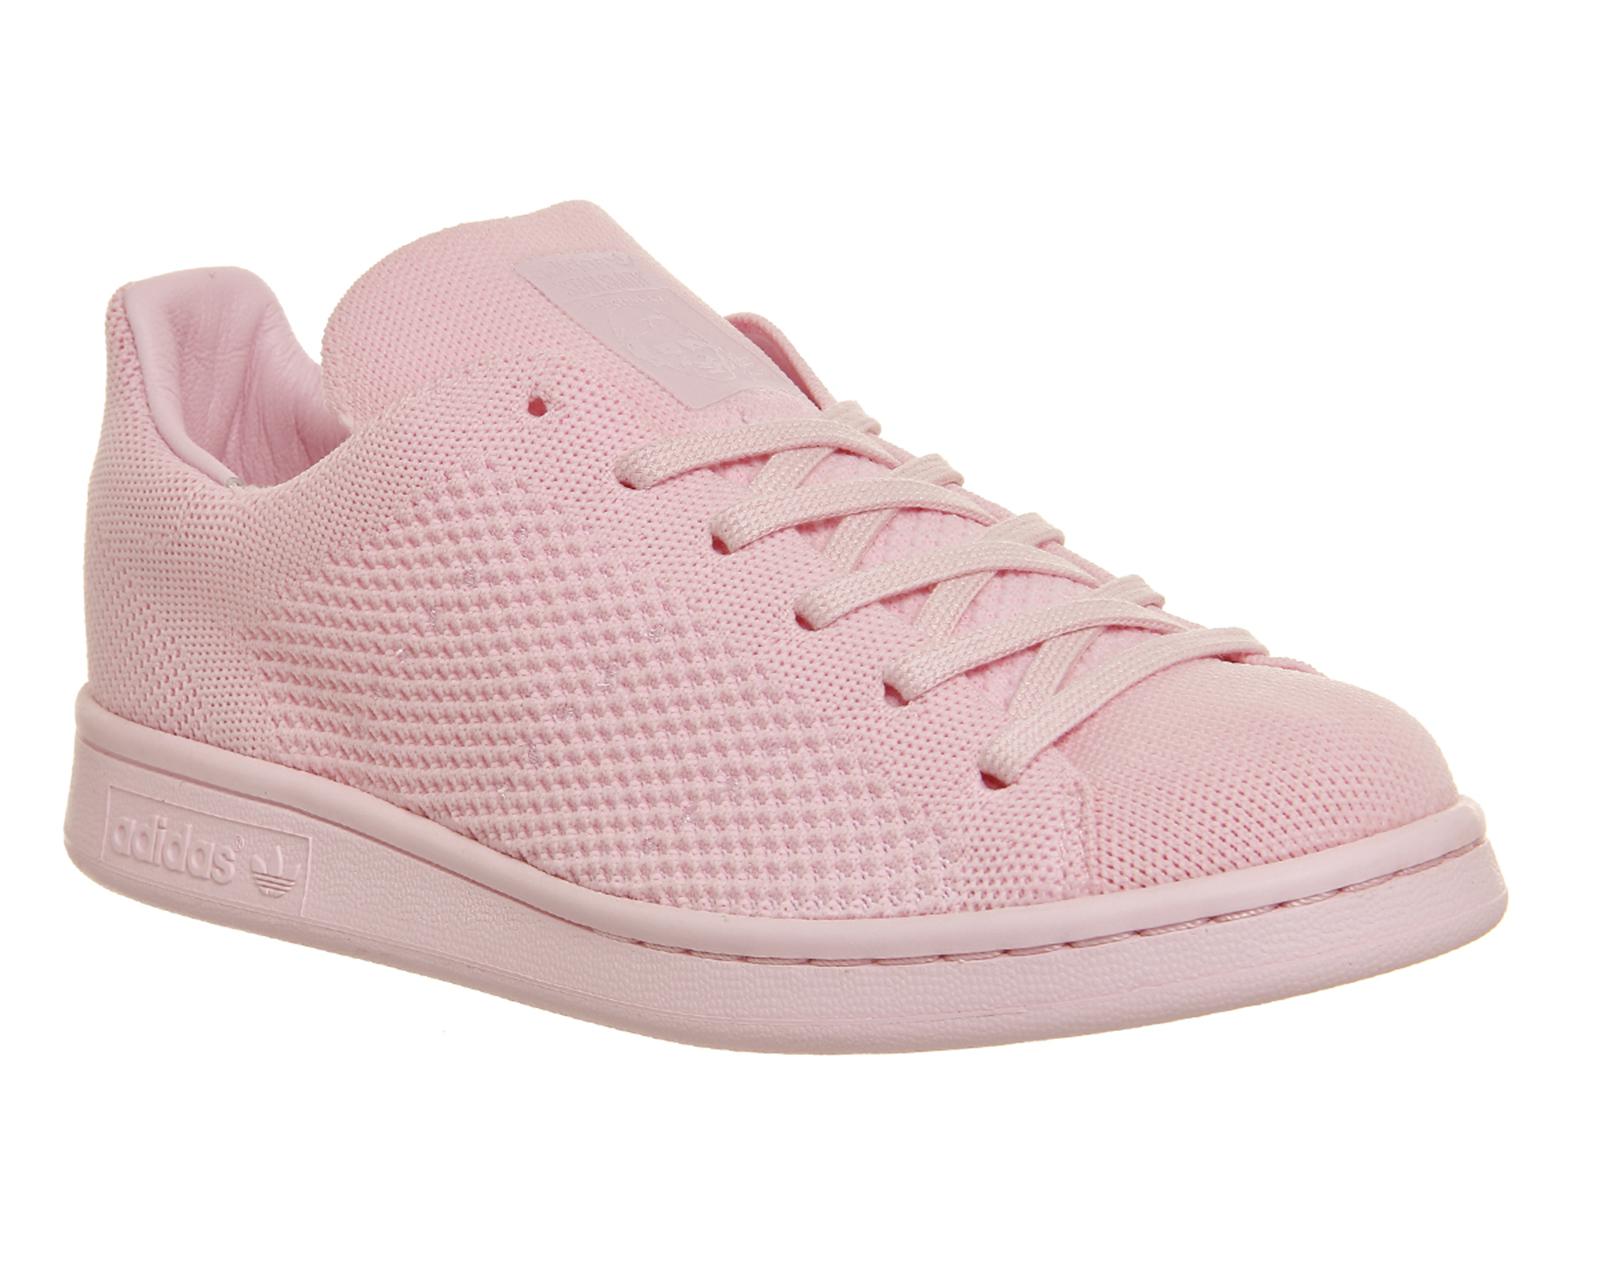 adidas Stan Smith Prime Knit in Pink - Lyst